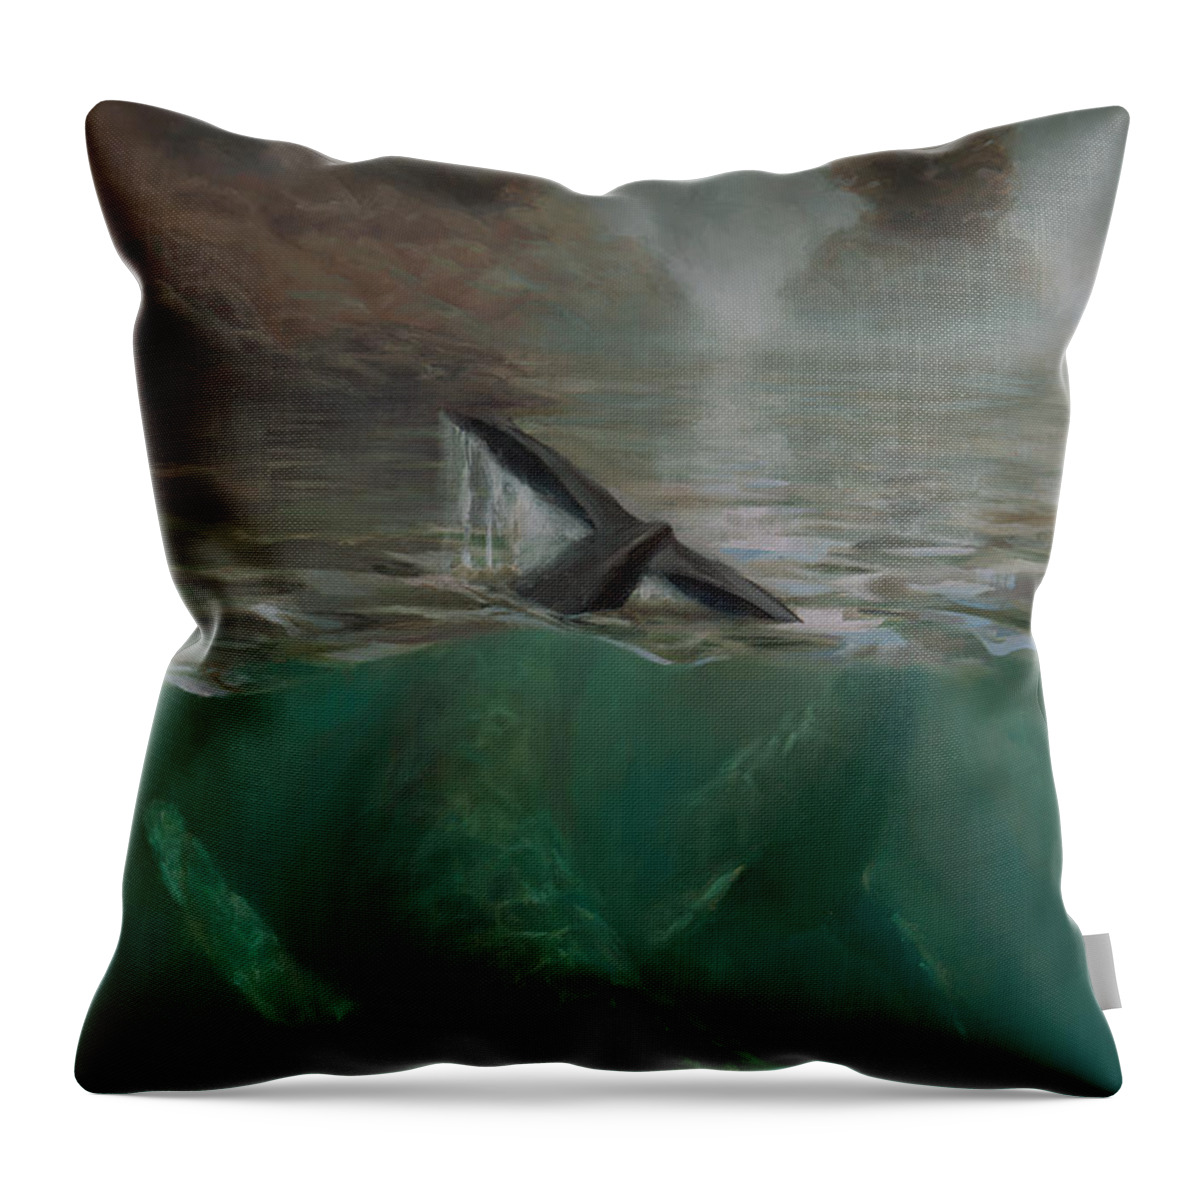 Humpback Throw Pillow featuring the painting Humpback Whales - Underwater Marine - Coastal Alaska Scenery by K Whitworth